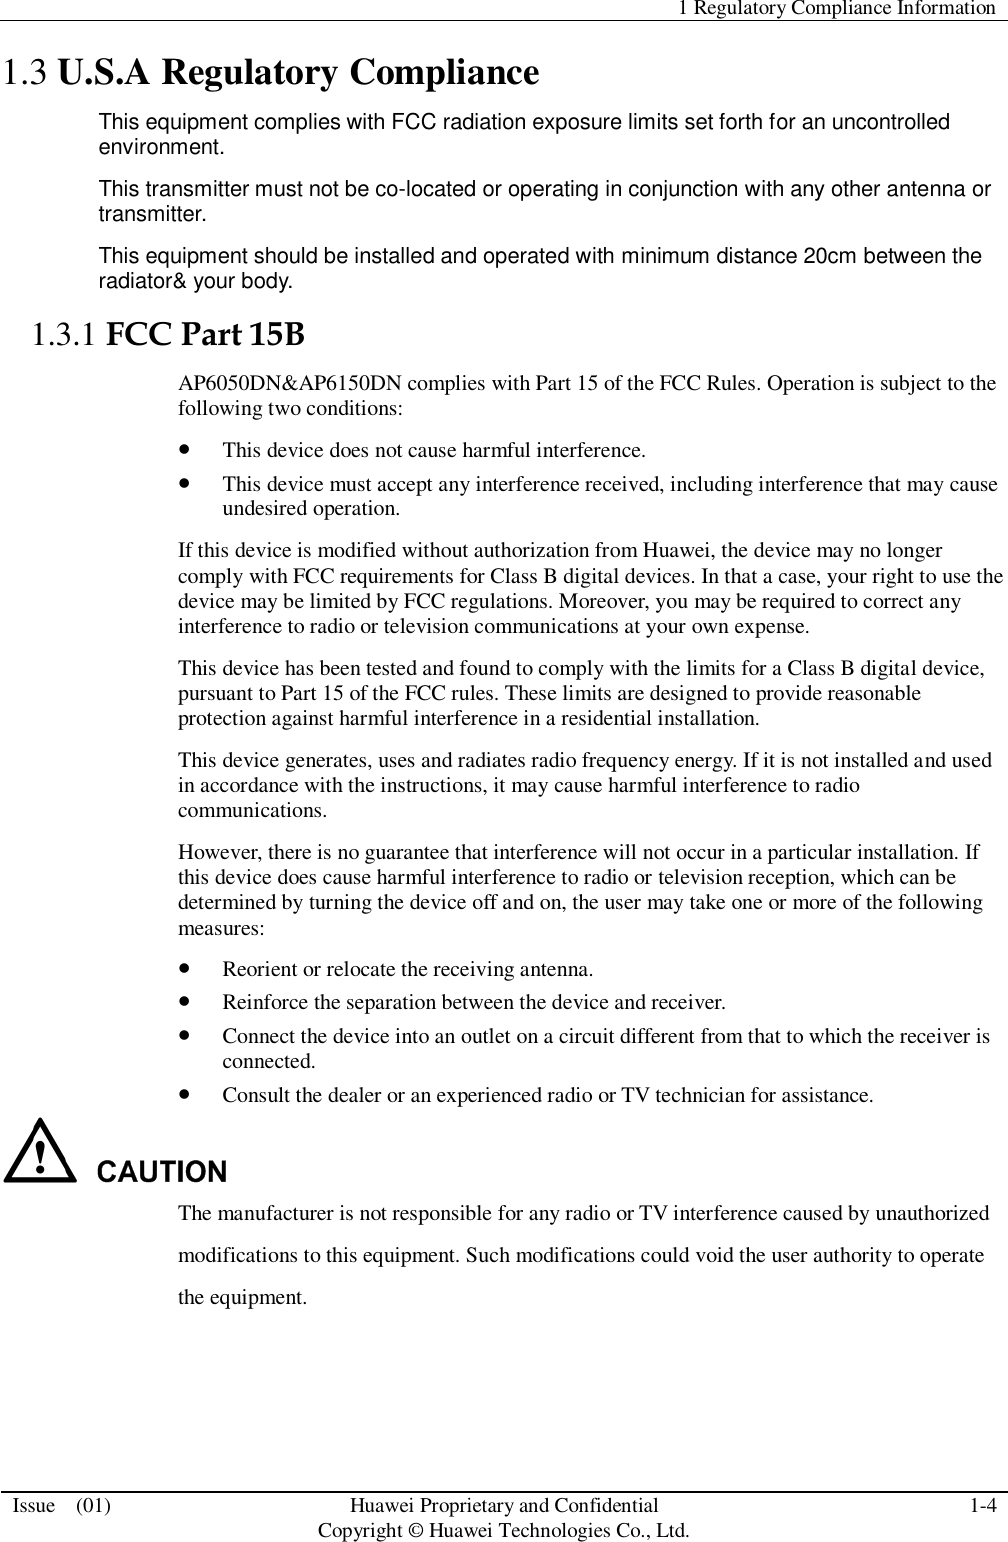   1 Regulatory Compliance Information  Issue    (01) Huawei Proprietary and Confidential                                     Copyright © Huawei Technologies Co., Ltd. 1-4  1.3 U.S.A Regulatory Compliance This equipment complies with FCC radiation exposure limits set forth for an uncontrolled environment. This transmitter must not be co-located or operating in conjunction with any other antenna or transmitter. This equipment should be installed and operated with minimum distance 20cm between the radiator&amp; your body.  1.3.1 FCC Part 15B AP6050DN&amp;AP6150DN complies with Part 15 of the FCC Rules. Operation is subject to the following two conditions:  This device does not cause harmful interference.  This device must accept any interference received, including interference that may cause undesired operation. If this device is modified without authorization from Huawei, the device may no longer comply with FCC requirements for Class B digital devices. In that a case, your right to use the device may be limited by FCC regulations. Moreover, you may be required to correct any interference to radio or television communications at your own expense. This device has been tested and found to comply with the limits for a Class B digital device, pursuant to Part 15 of the FCC rules. These limits are designed to provide reasonable protection against harmful interference in a residential installation. This device generates, uses and radiates radio frequency energy. If it is not installed and used in accordance with the instructions, it may cause harmful interference to radio communications. However, there is no guarantee that interference will not occur in a particular installation. If this device does cause harmful interference to radio or television reception, which can be determined by turning the device off and on, the user may take one or more of the following measures:  Reorient or relocate the receiving antenna.  Reinforce the separation between the device and receiver.  Connect the device into an outlet on a circuit different from that to which the receiver is connected.  Consult the dealer or an experienced radio or TV technician for assistance.  The manufacturer is not responsible for any radio or TV interference caused by unauthorized modifications to this equipment. Such modifications could void the user authority to operate the equipment. 